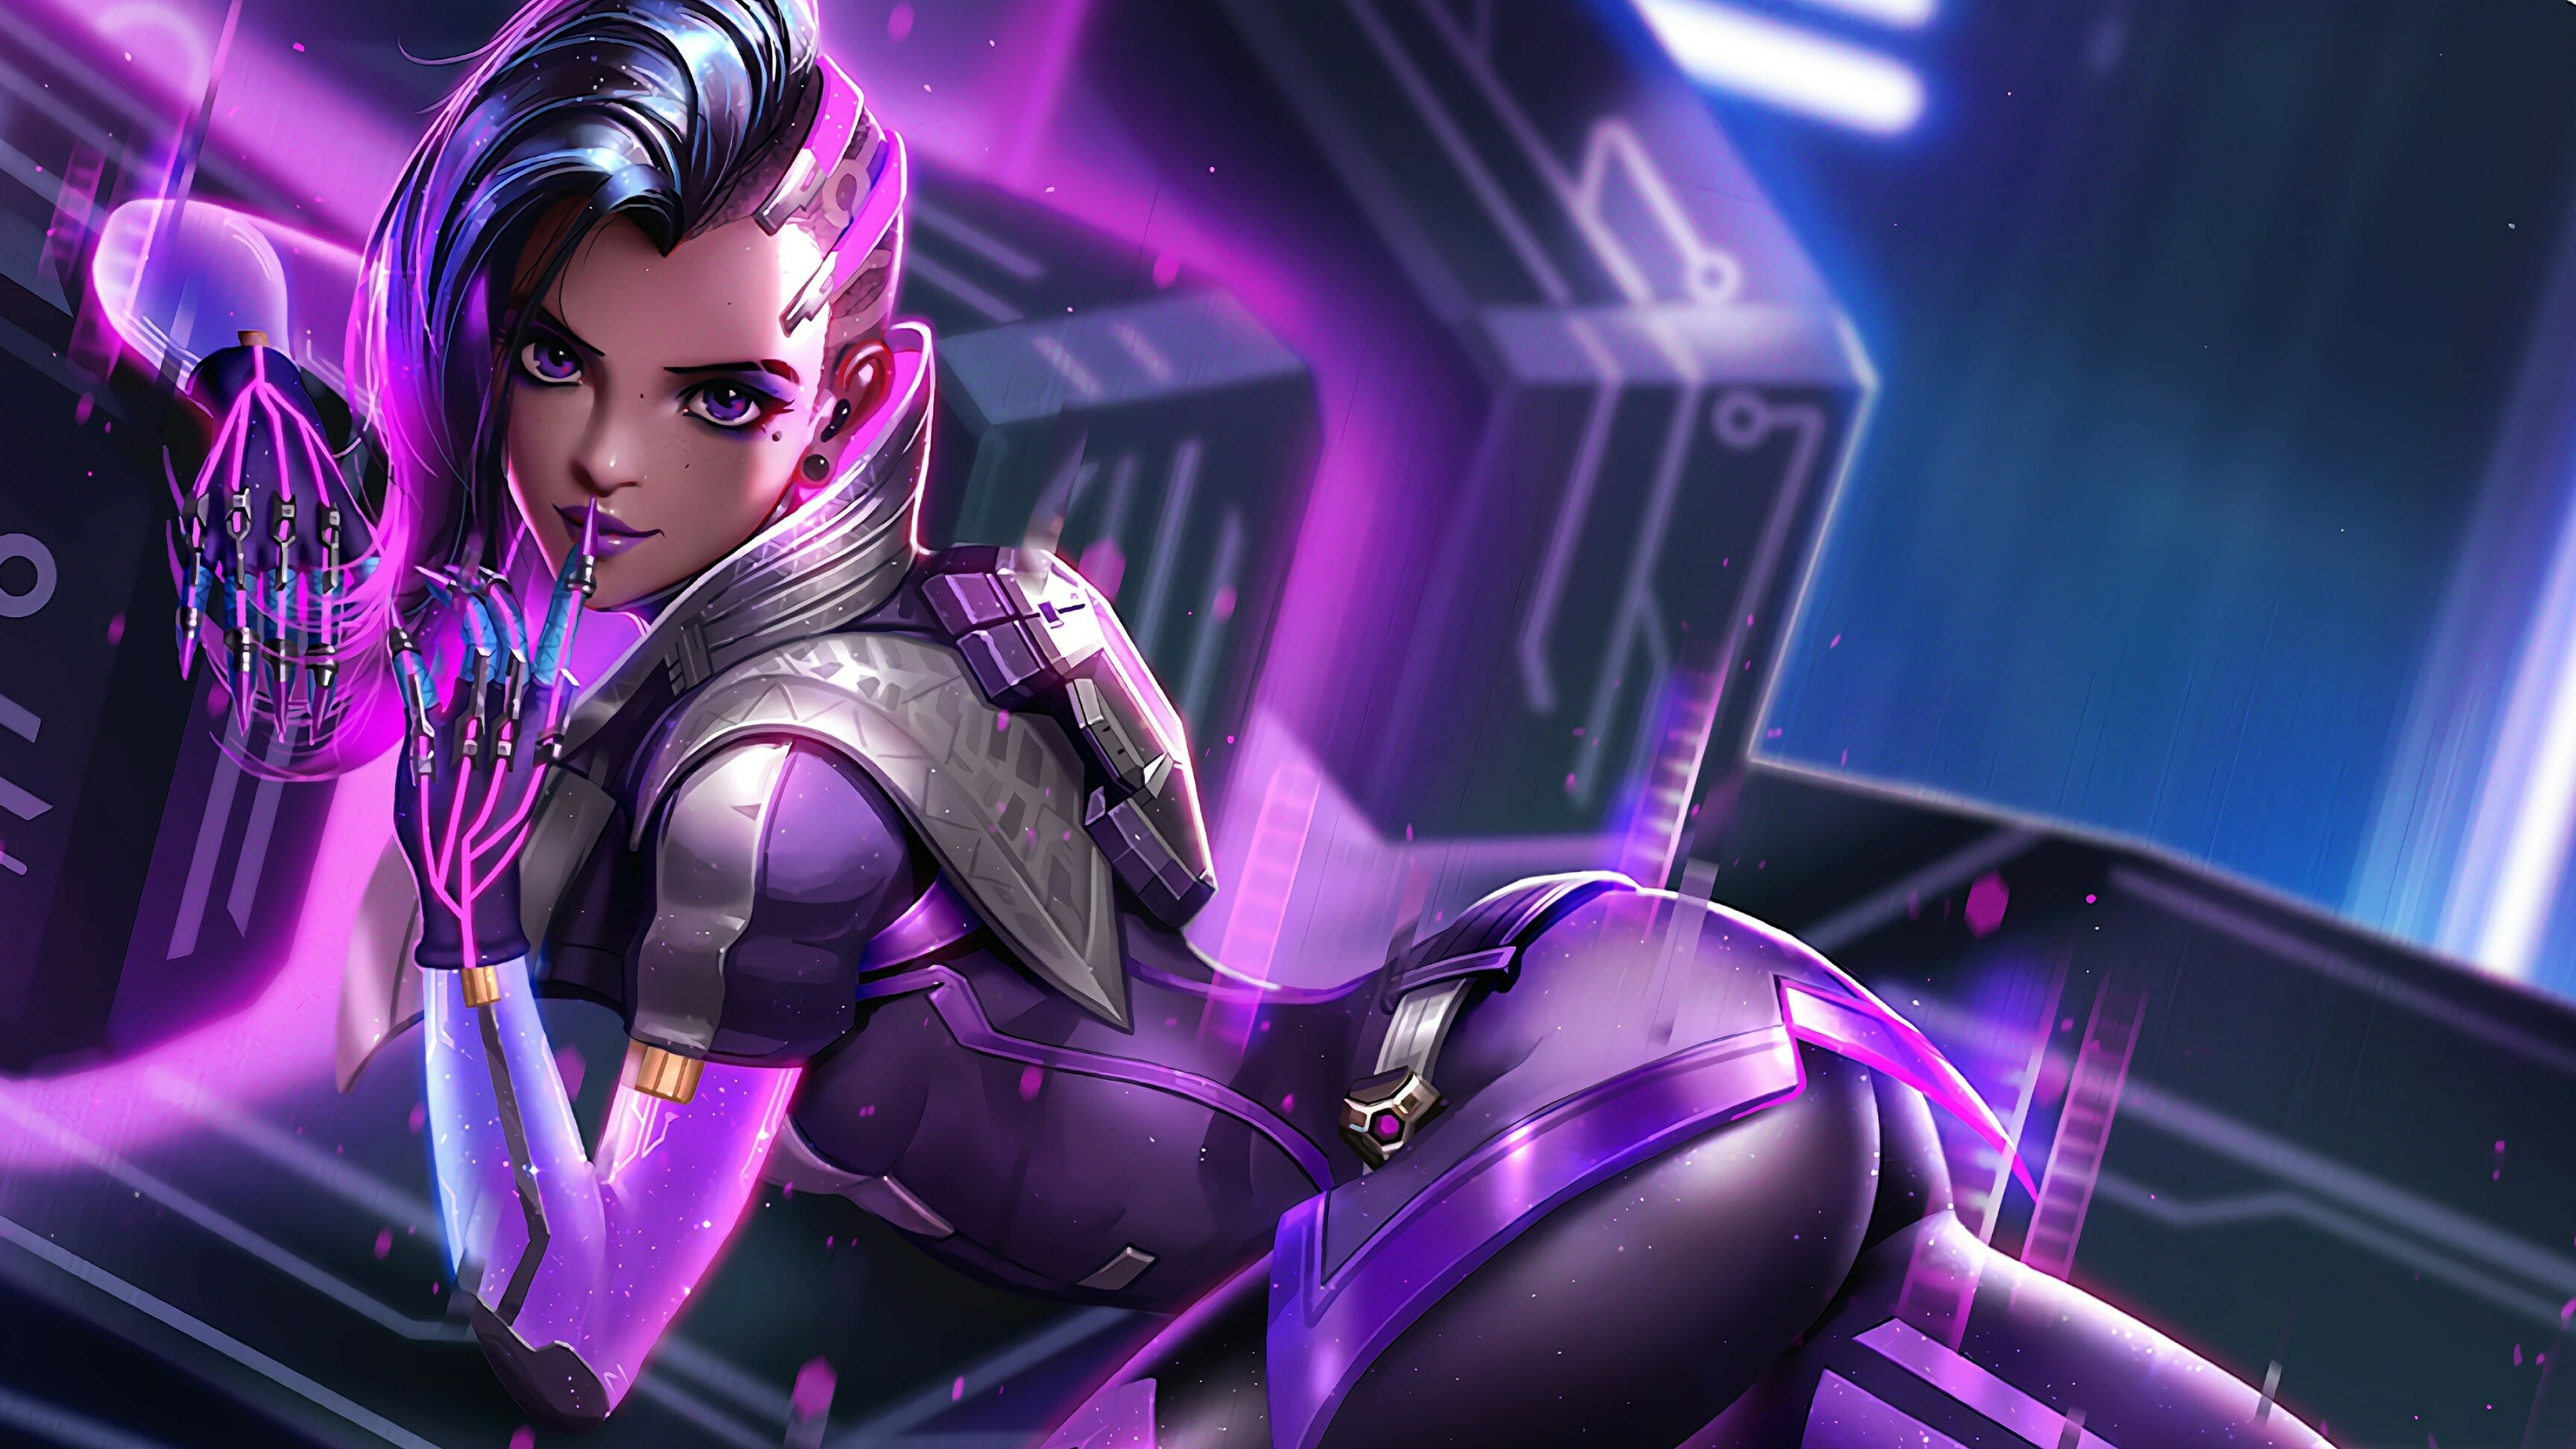 Overwatch: Sombra, Olivia Coloma, A powerful infiltrator. 3840x2160 4K Background.